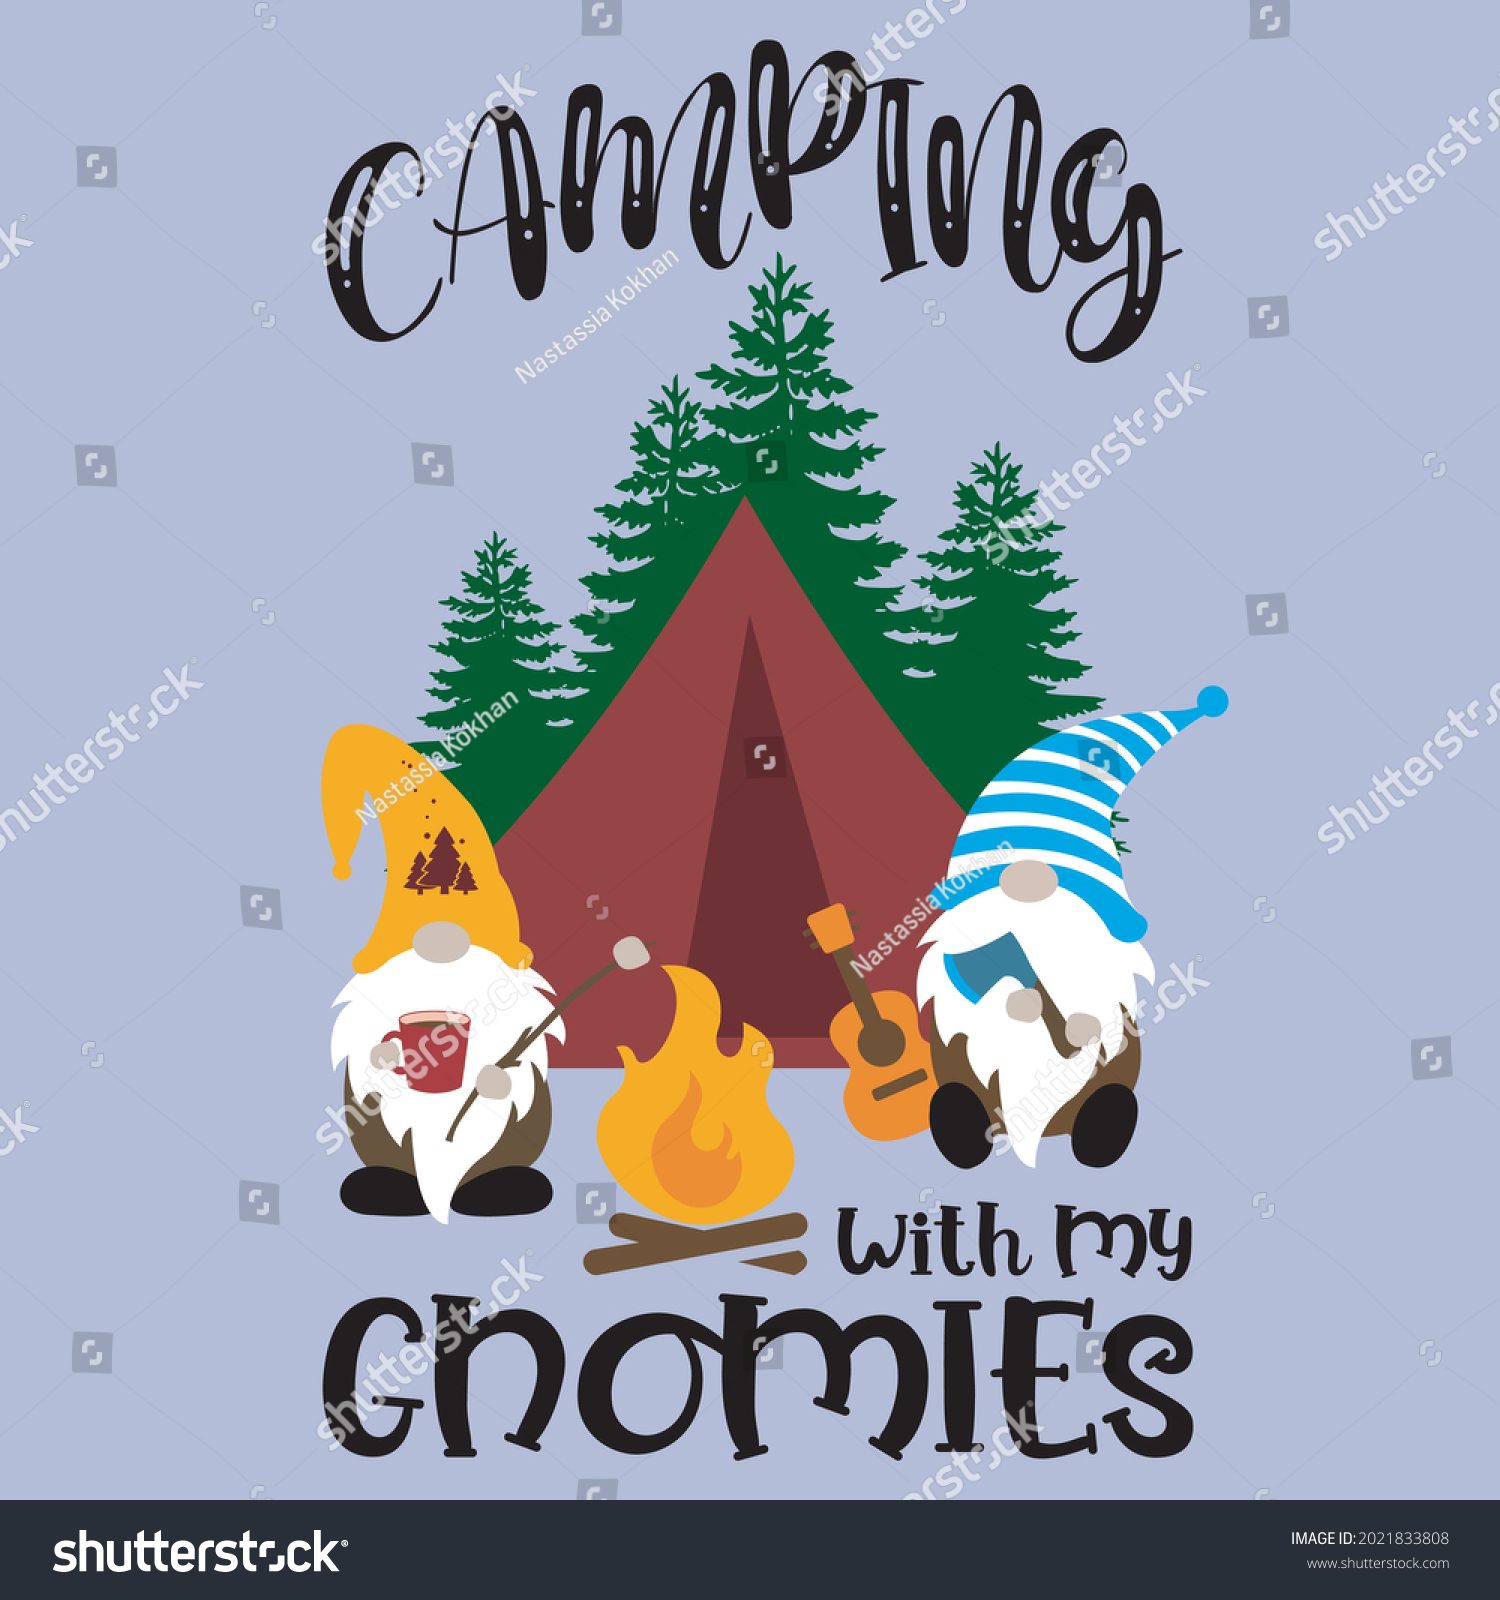 SVG of Camping with my gnomies svg vector illustration isolated on white background. Gnomes   are sitting near the tent. Happy gnome camper . Camping shirt design.Travel illustration for family vacat svg